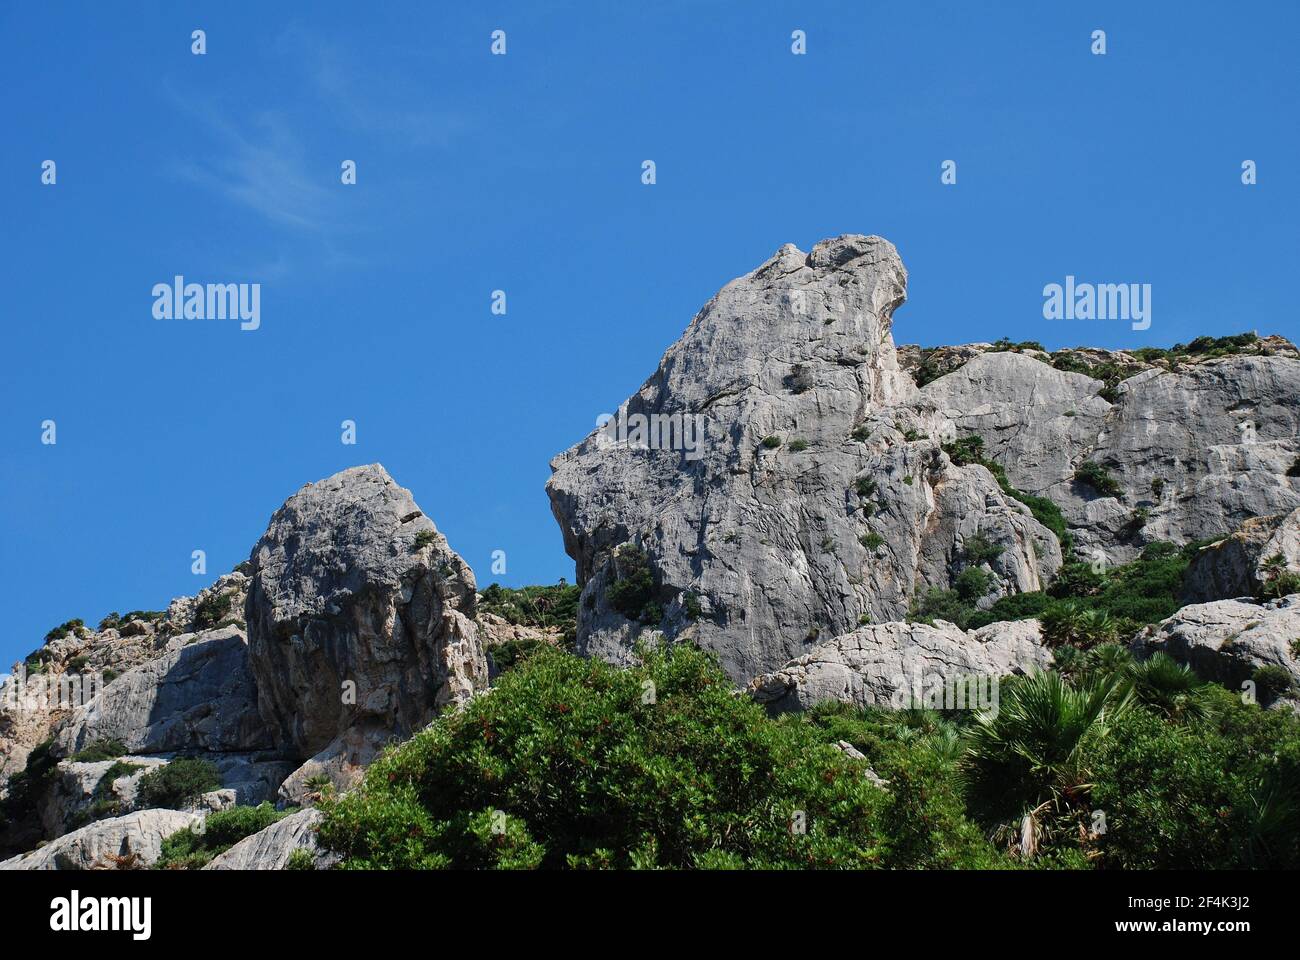 The rocky peaks of the Tramuntana mountains in the Boquer valley trail near Puerto Pollensa on the Spanish island of Majorca. Stock Photo